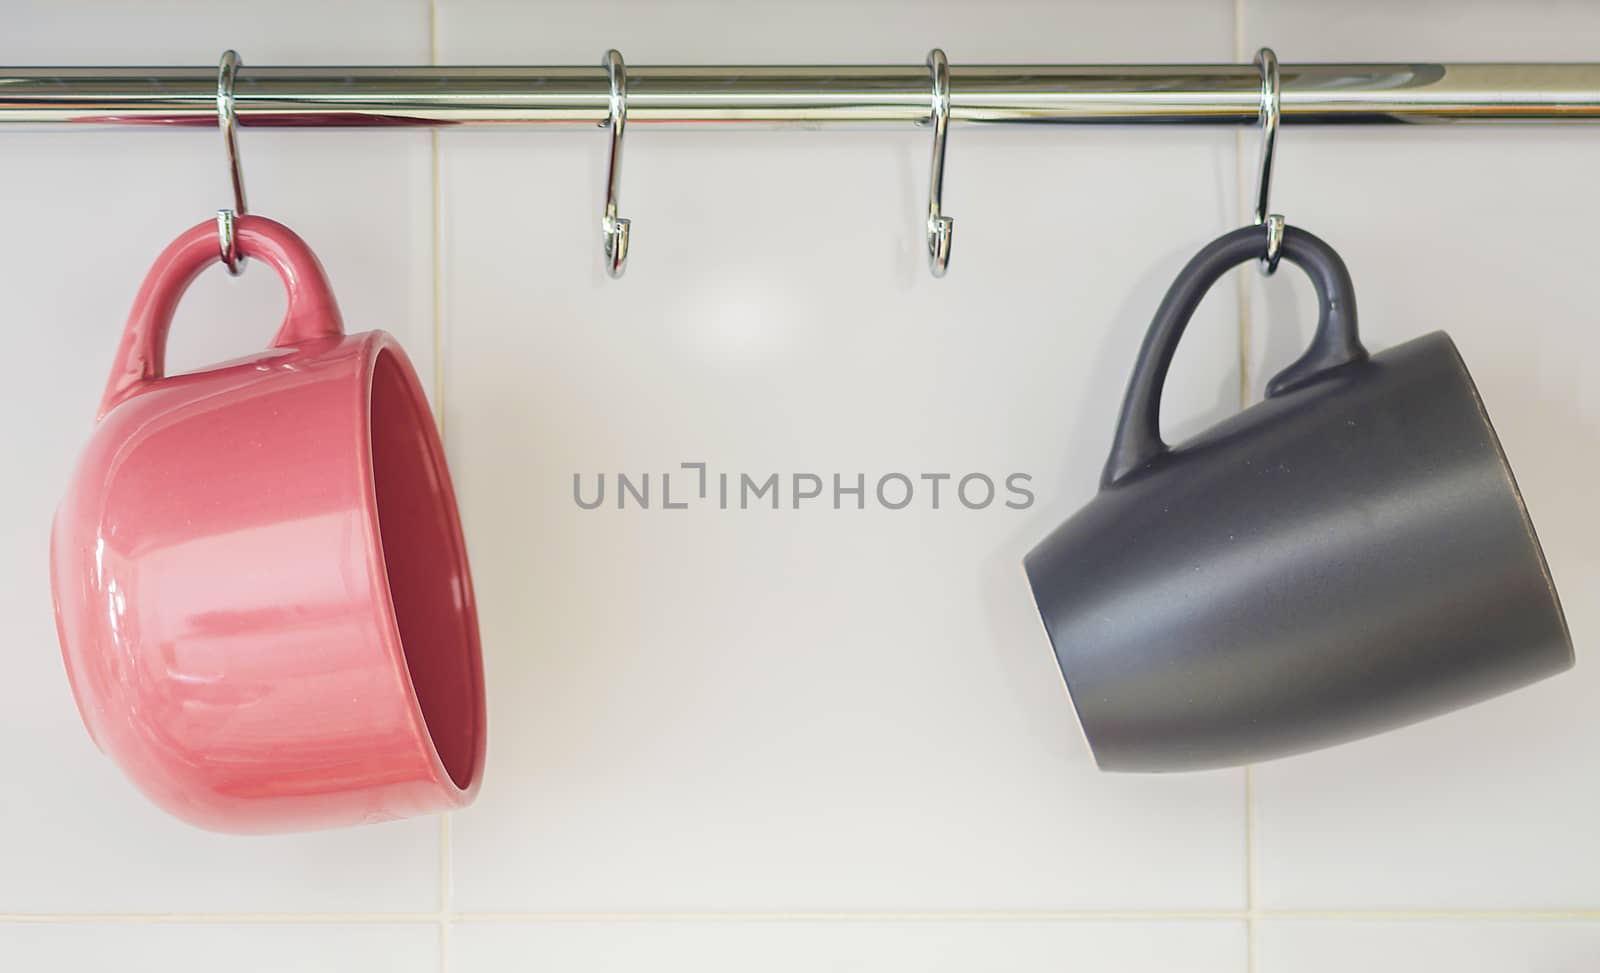 Two hanging mugs, one pink and one gray